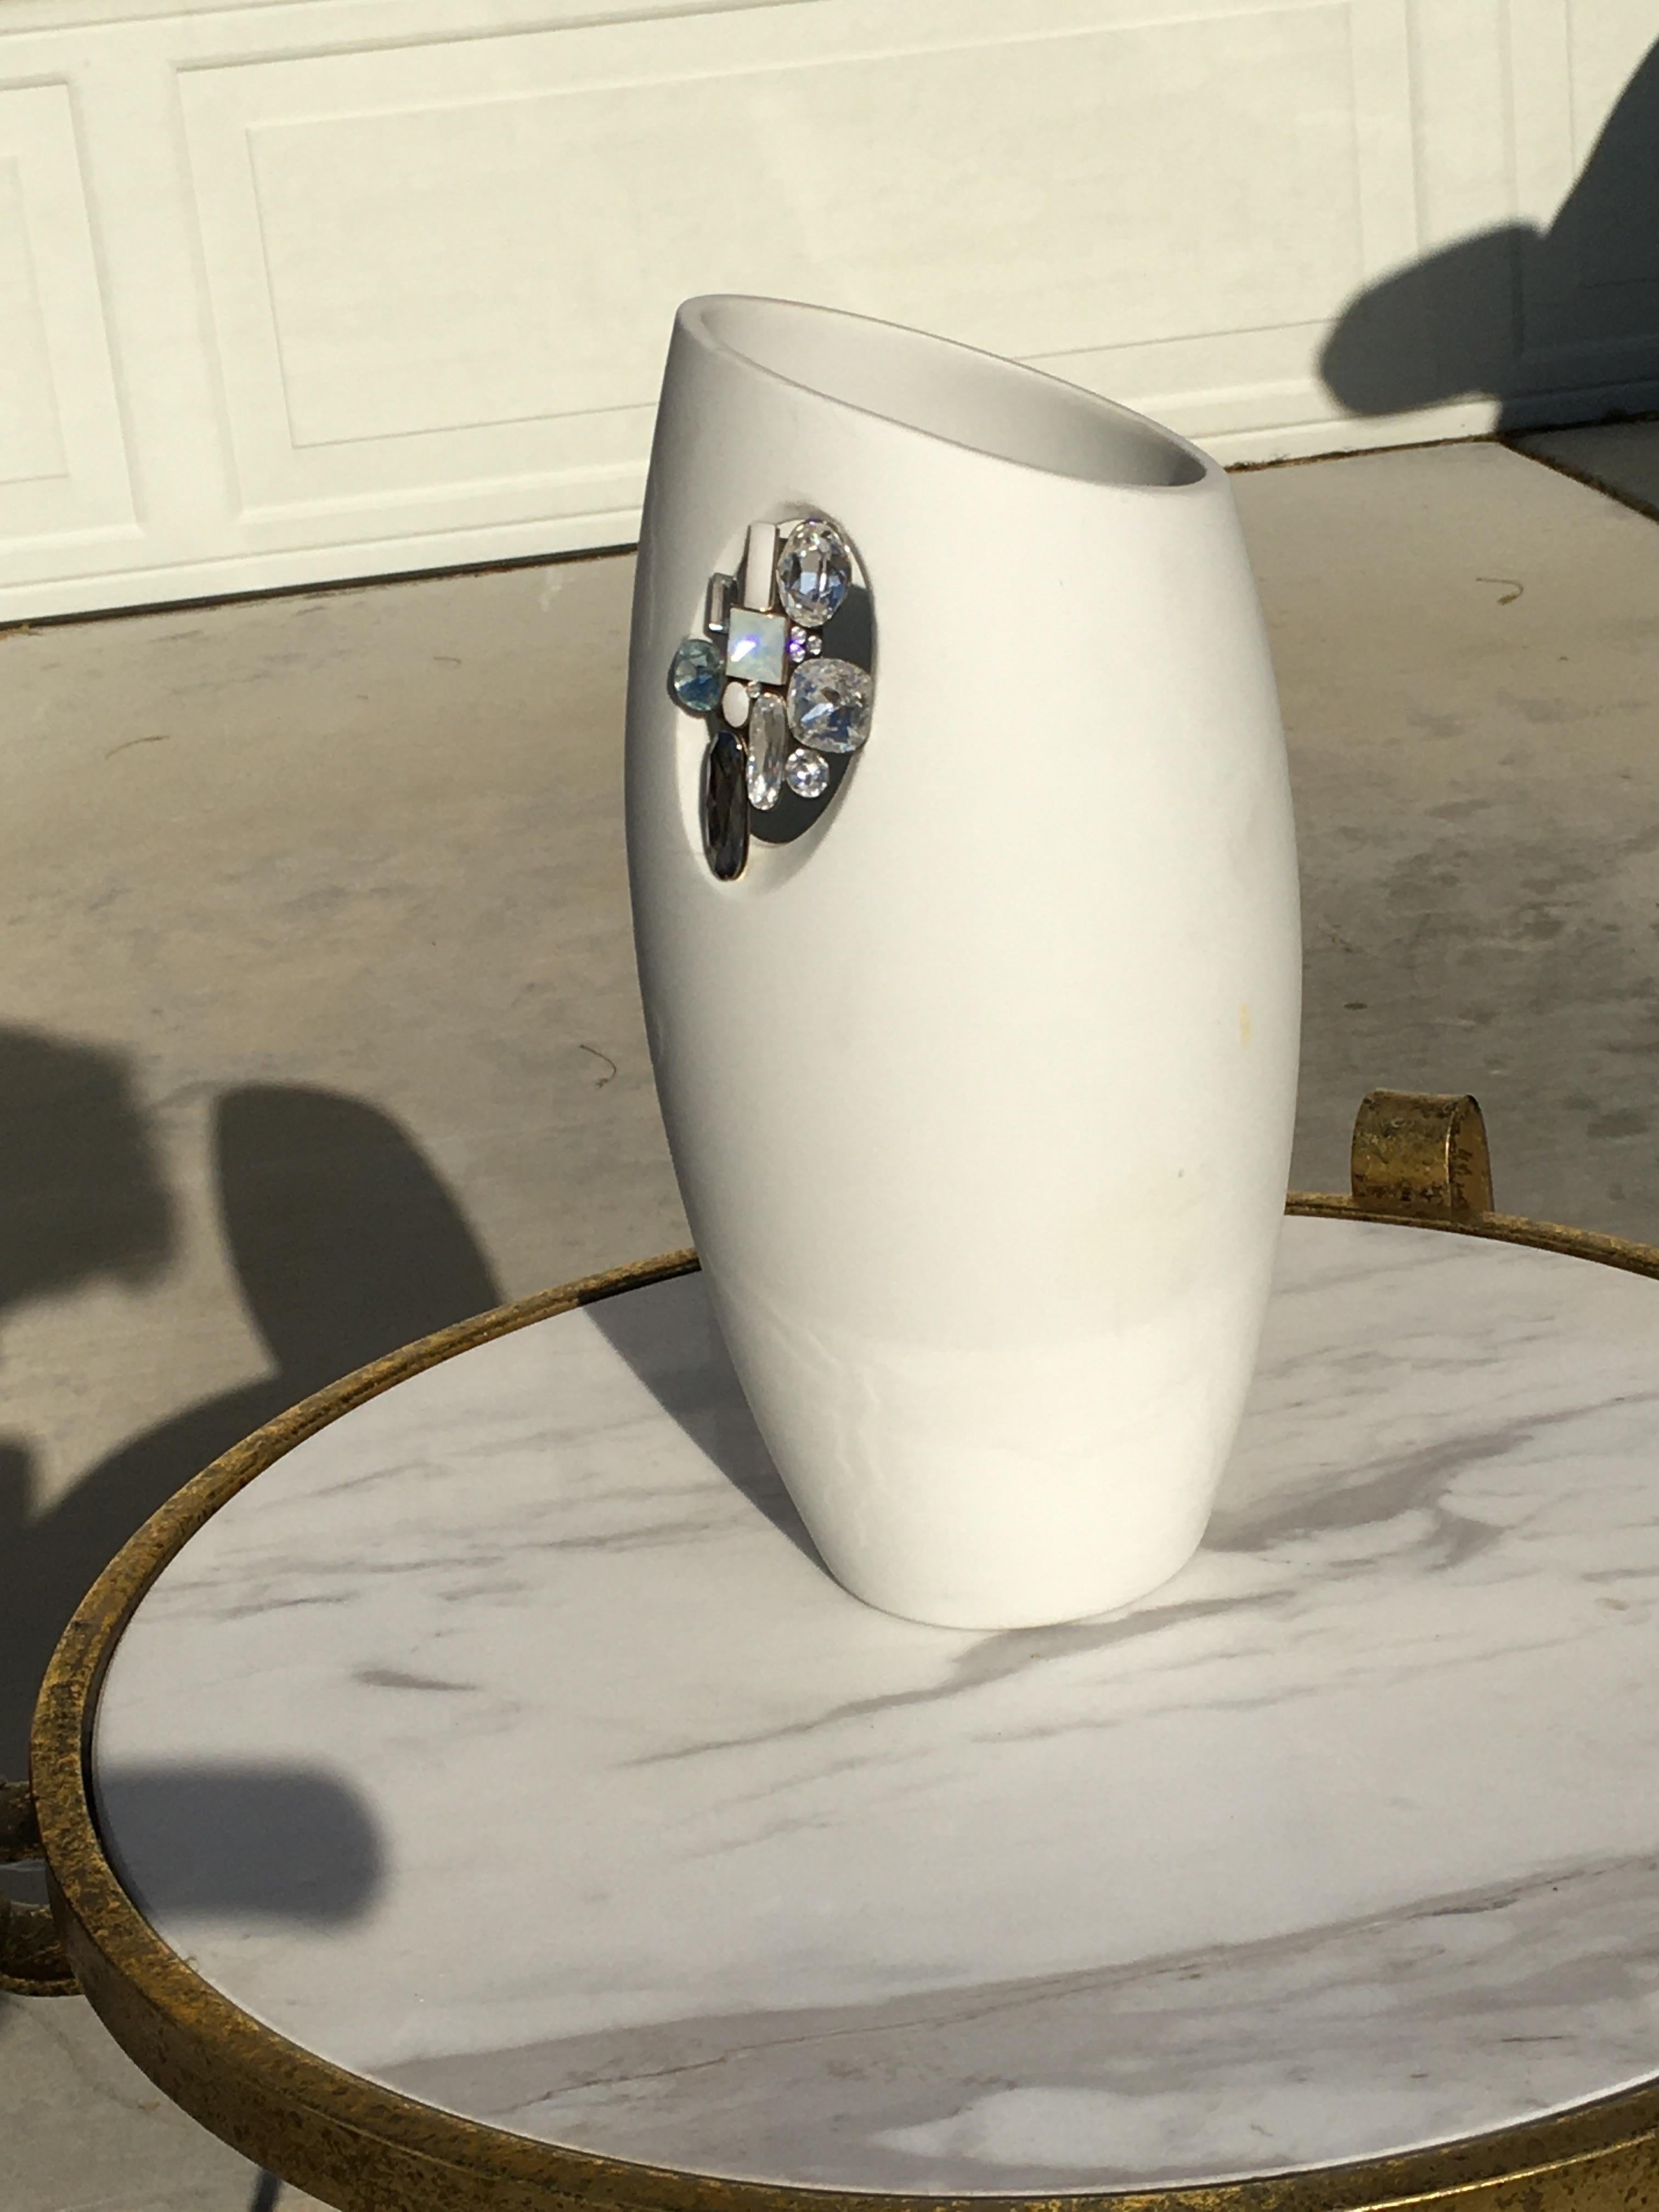 Tro of Swarovski Porcelain & Jeweld Crystal “Milik” Vases Rare Sold Out Edition  In Good Condition For Sale In Palm Springs, CA